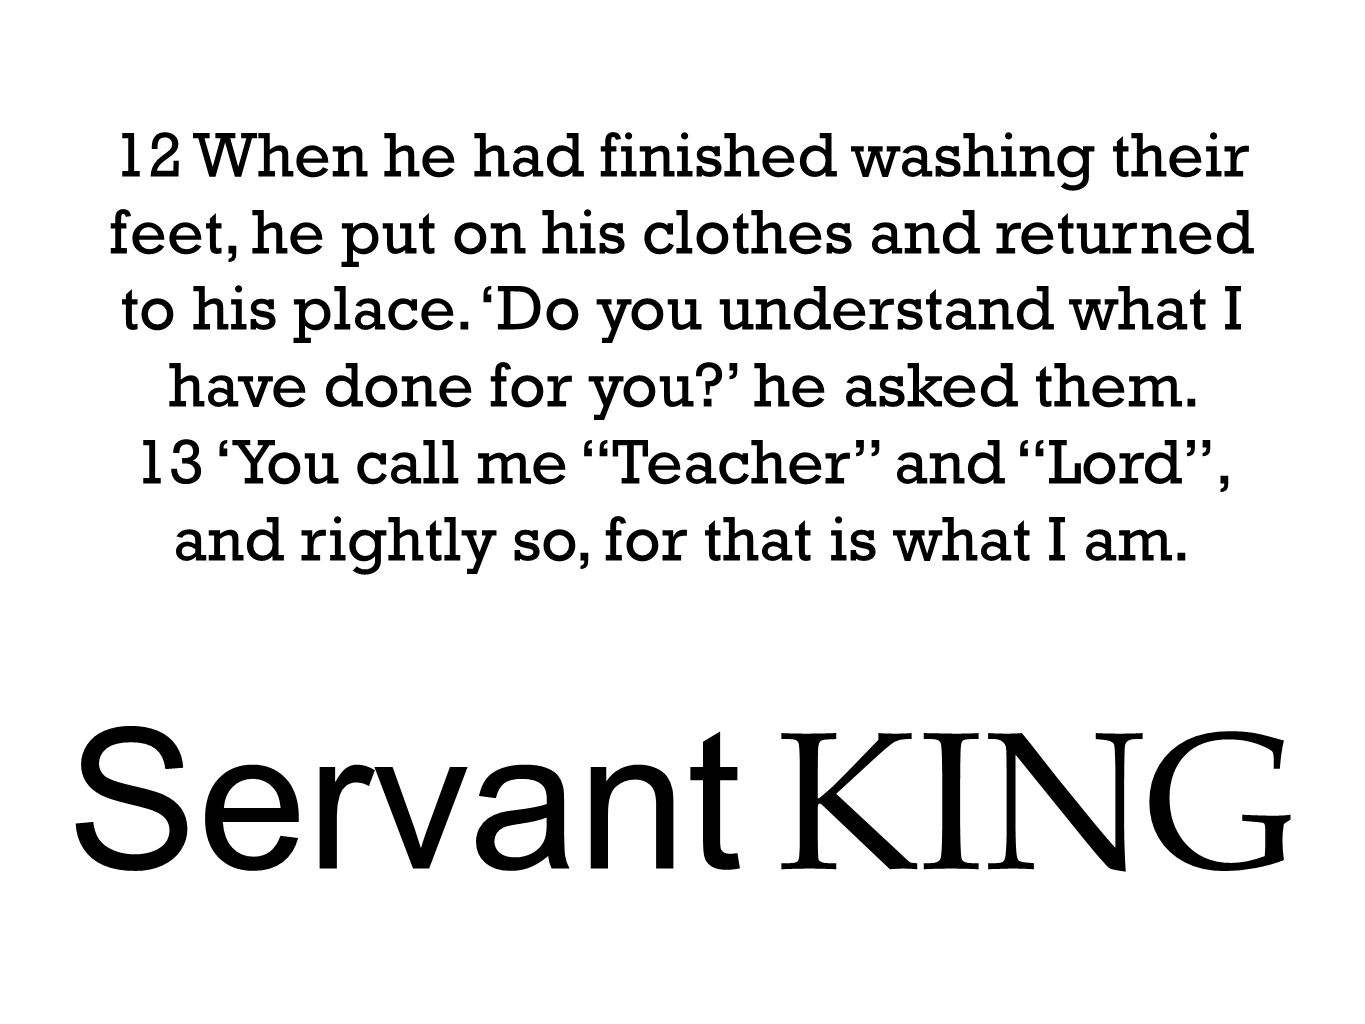 12 When he had finished washing their feet, he put on his clothes and returned to his place.